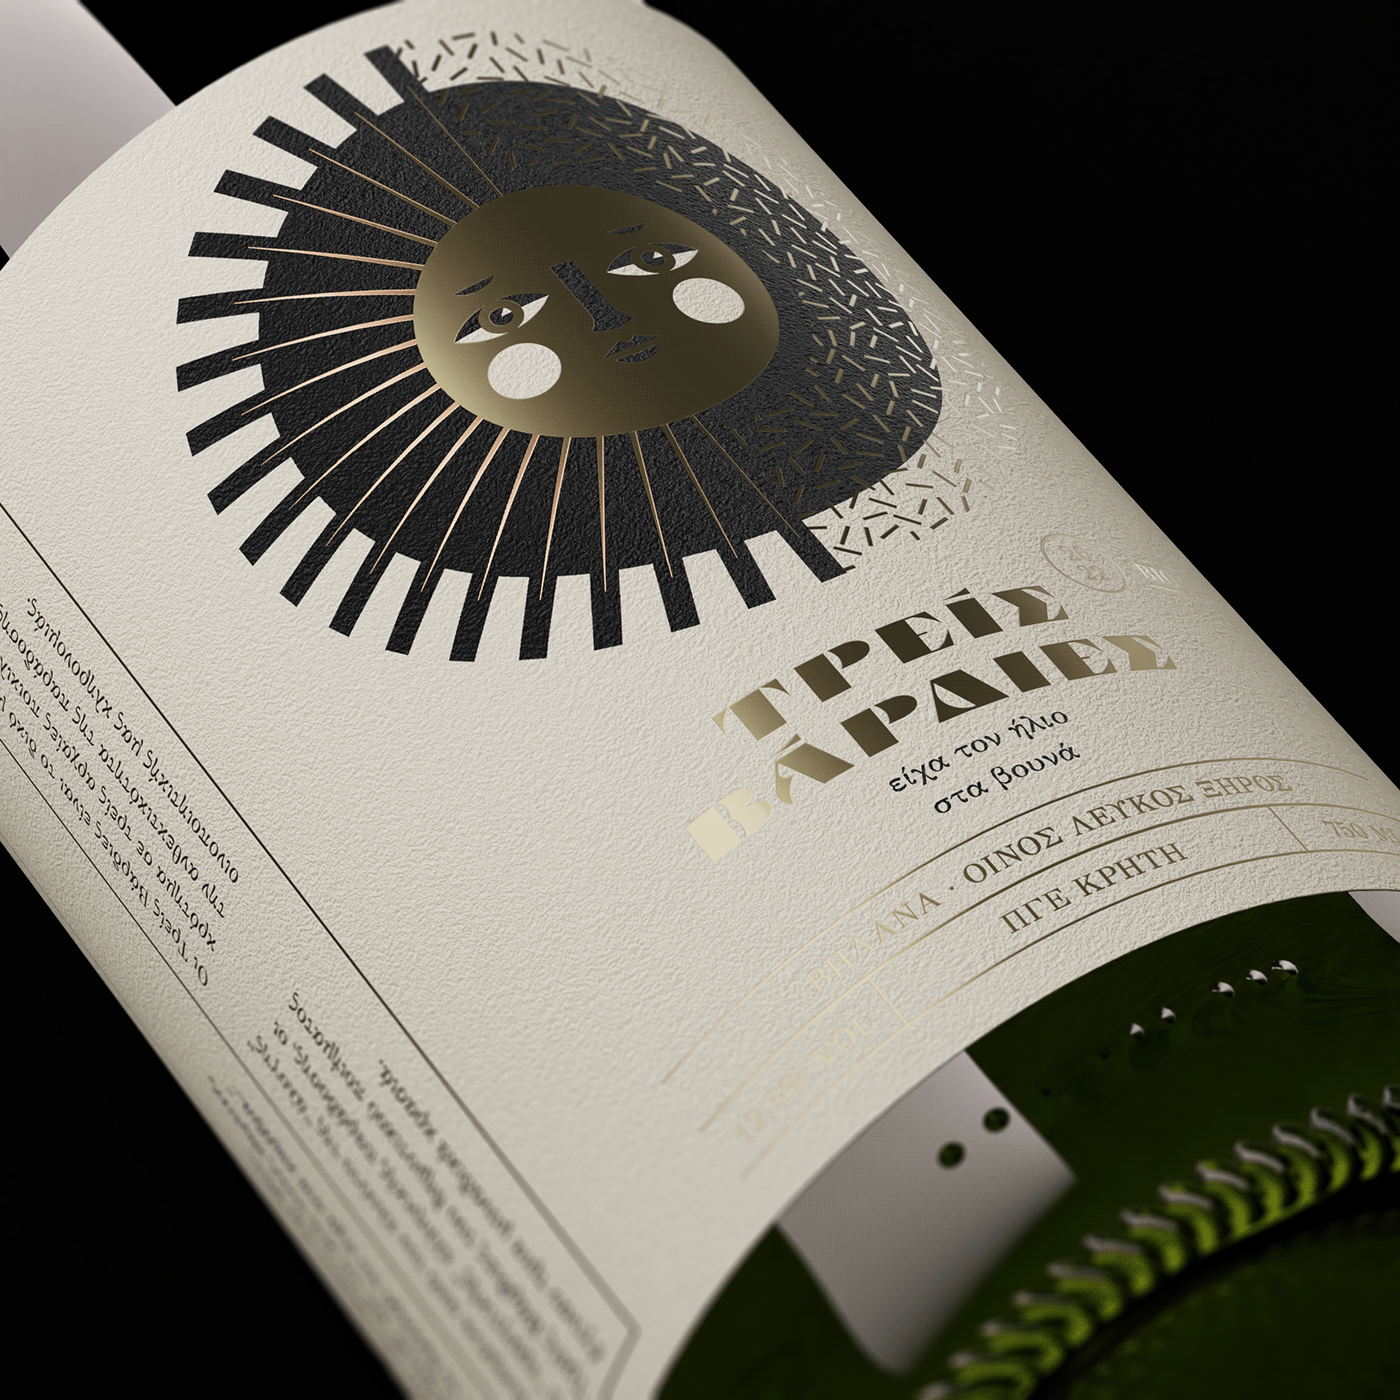 Three Shifts is a wine trilogy Inspired by the Greek winemaking heritage.